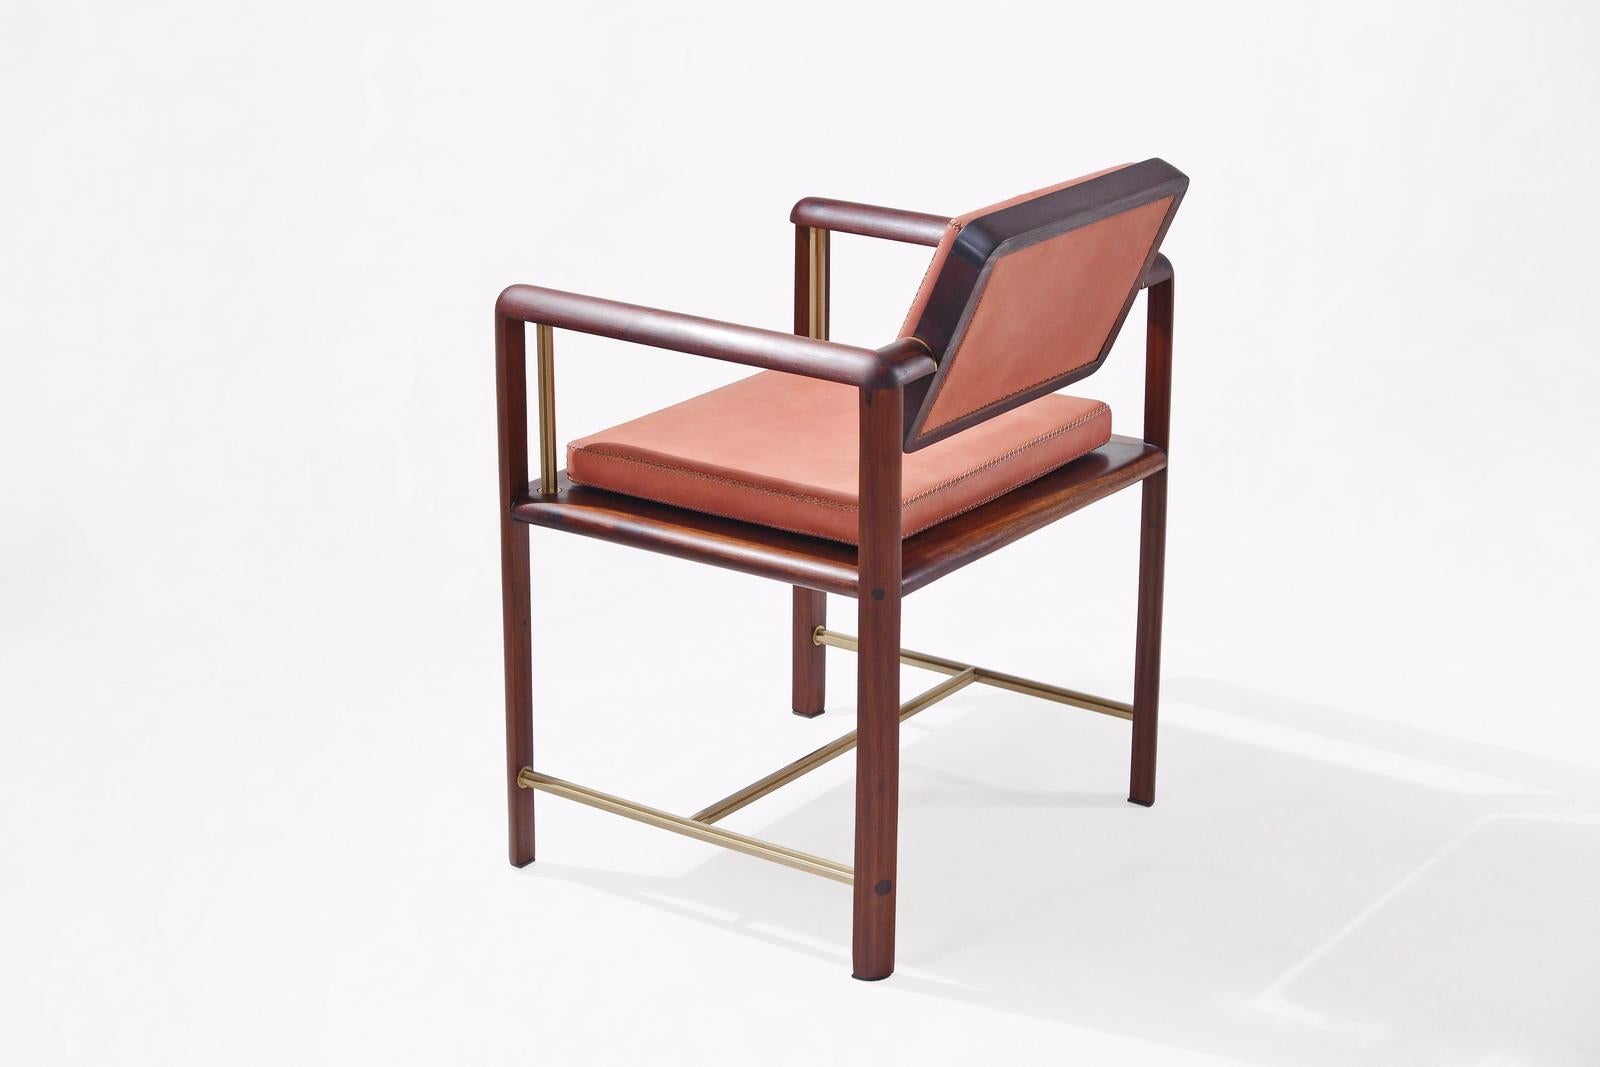 Brass Bespoke Chair Reclaimed Hardwood Handstitched Leather Seating, P. Tendercool For Sale